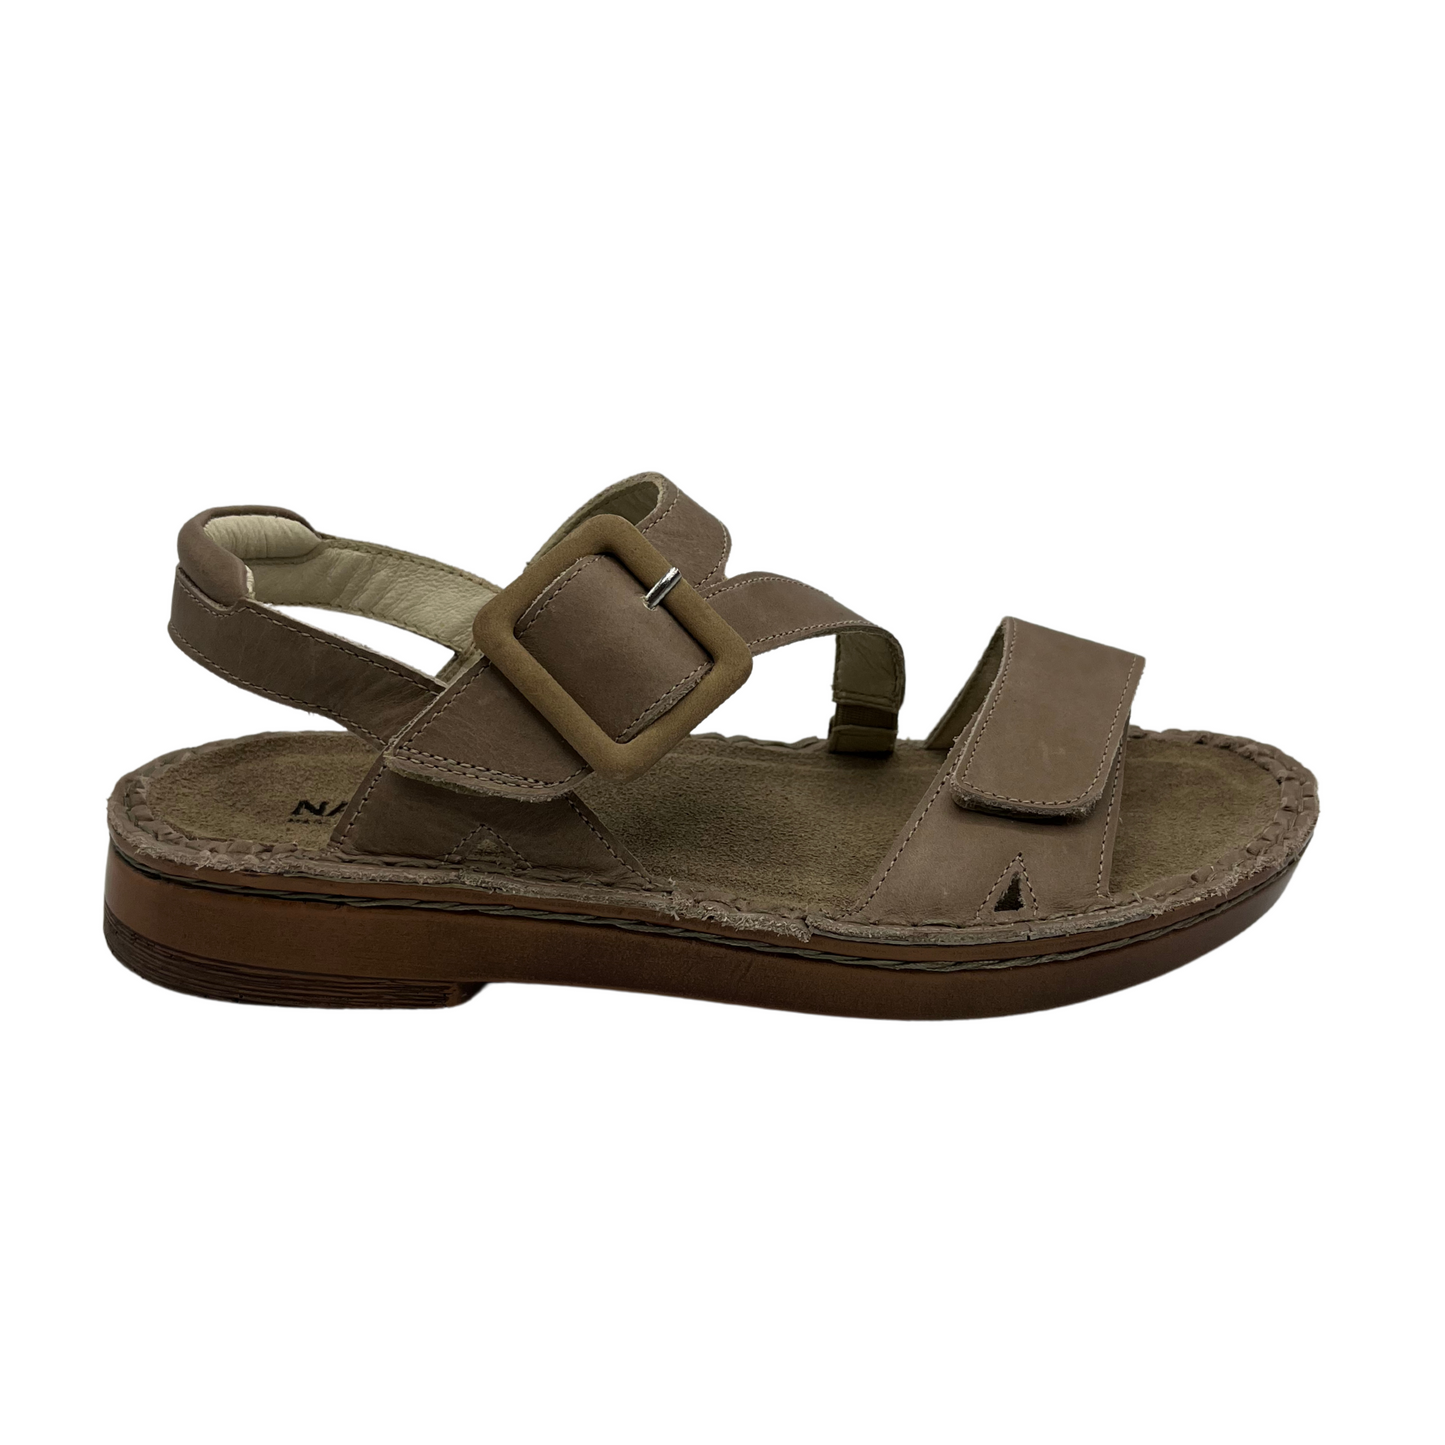 Right facing view of khaki leather sandal with velcro toe strap, padded collar and suede lined footbed